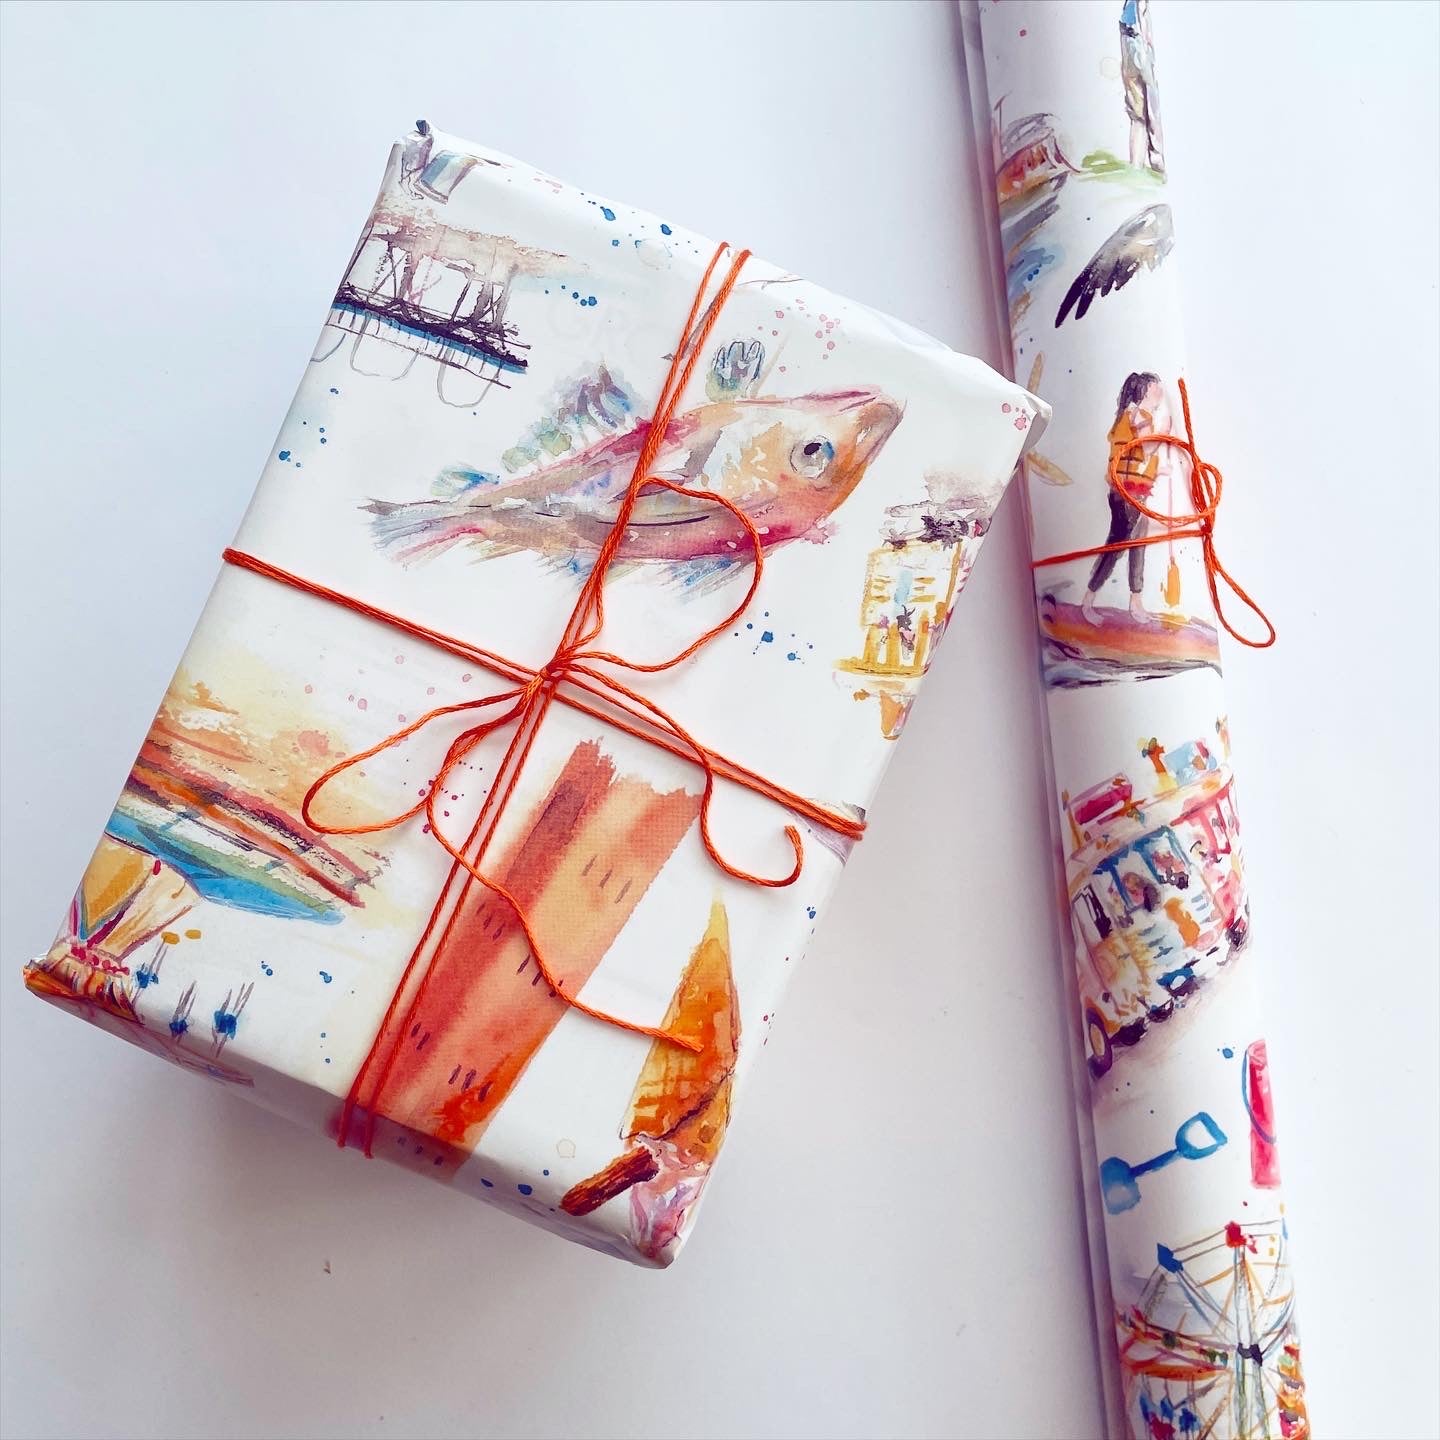 Luxury gift wrap featuring watercolour illustrations of local landmarks in Grimsby and Cleethorpes such as the Dock Tower and Cleethorpes Pier by Eve Leoni Smith.